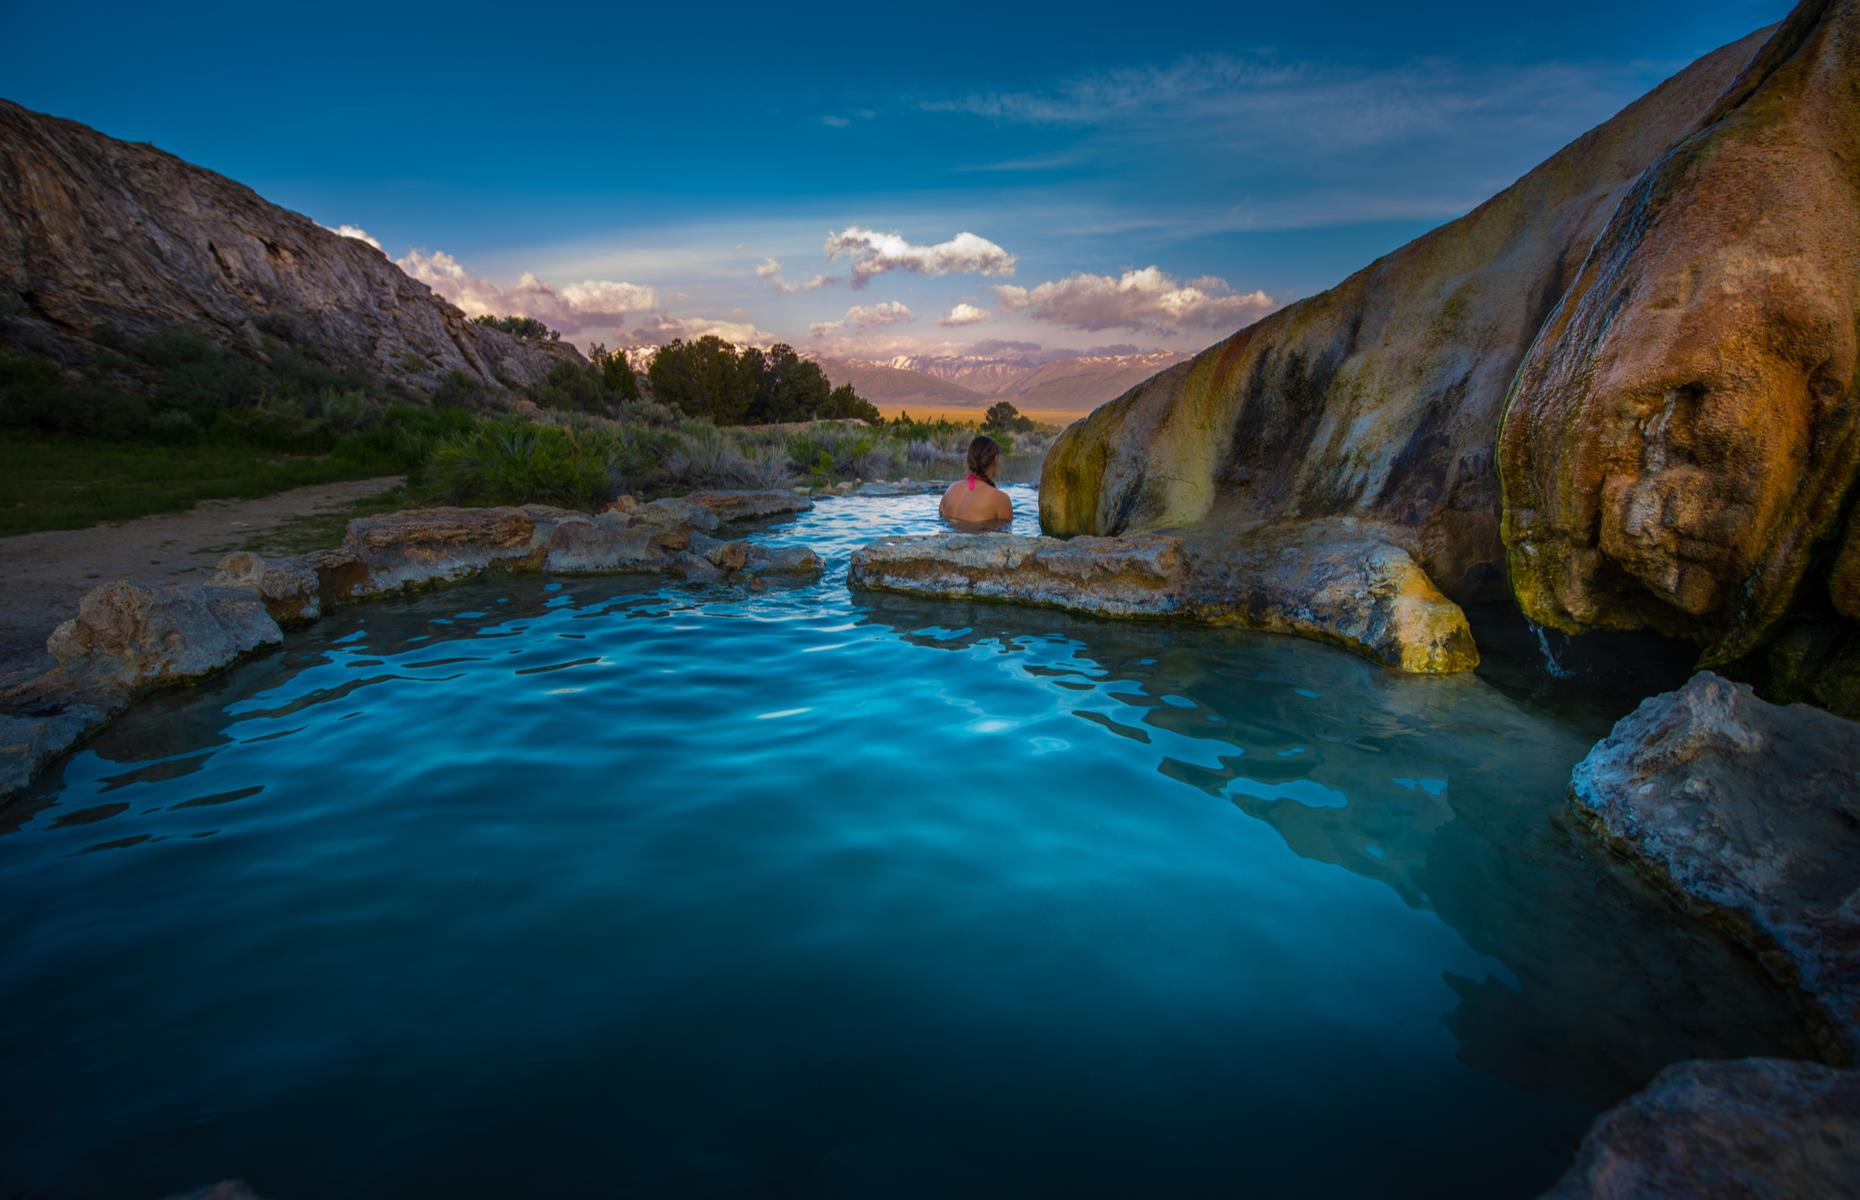 <p>These shallow thermal pools offer incredible sunsets views over California’s Eastern Sierra. Lined with silky soft, mineral-rich clay, the piping hot water from the source is cooled to a glorious 102°F as it flows over the rocks to form these pools. You’ll find Travertine Hot Springs a five-minute drive from Bridgeport and, be warned, clothing is optional. </p>